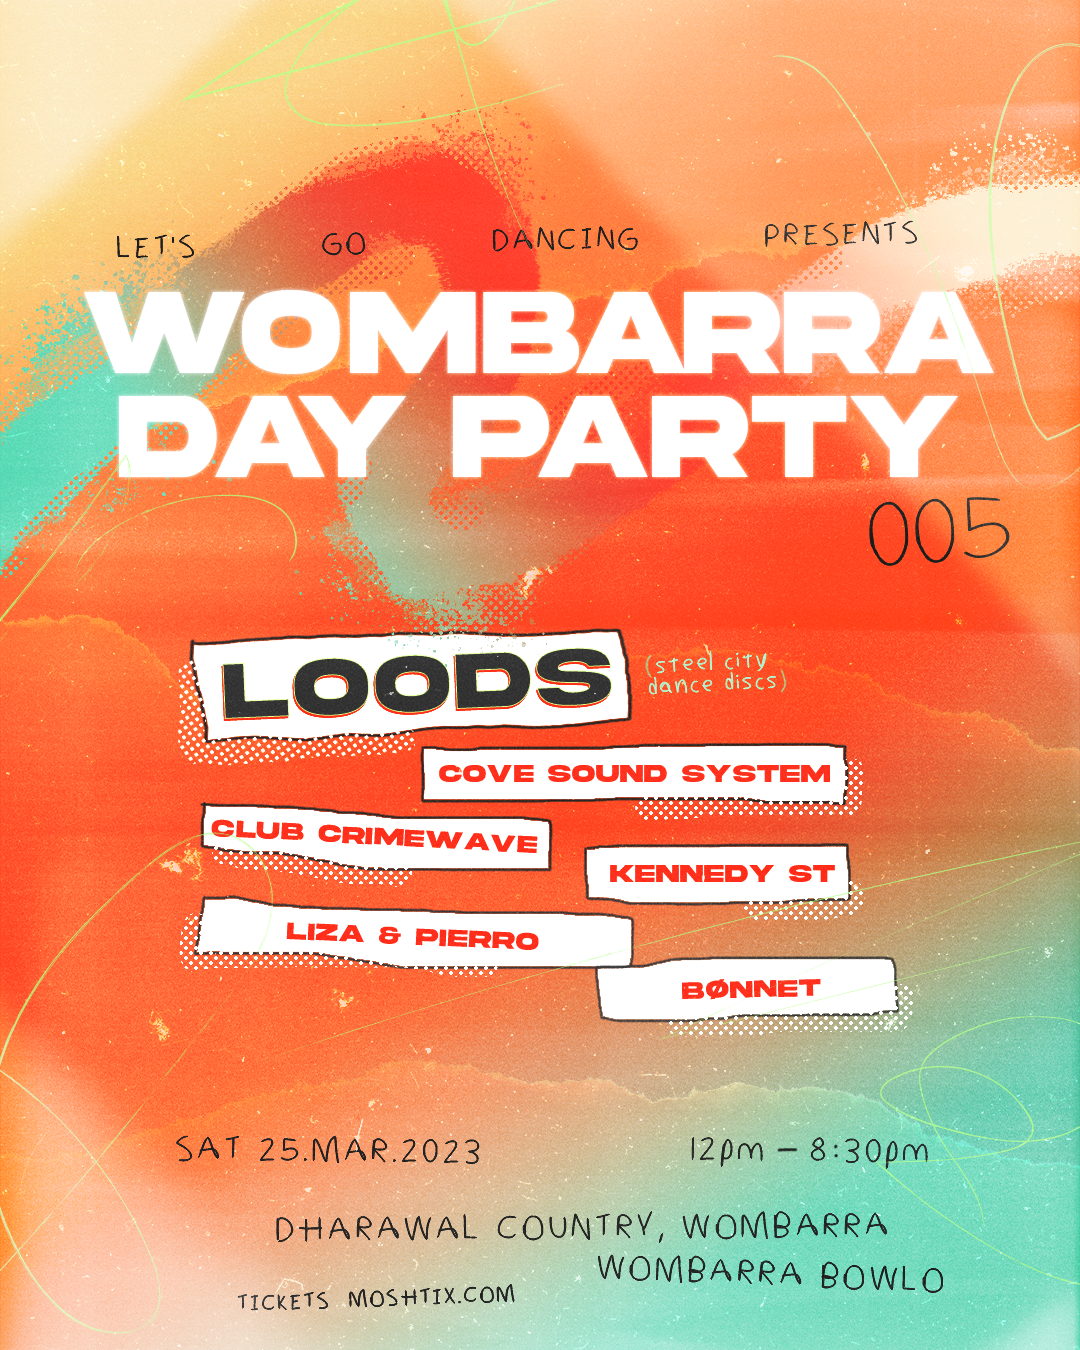 Wombarra Day Party 5 feat. Loods (Steel City Dance Discs) - Página frontal